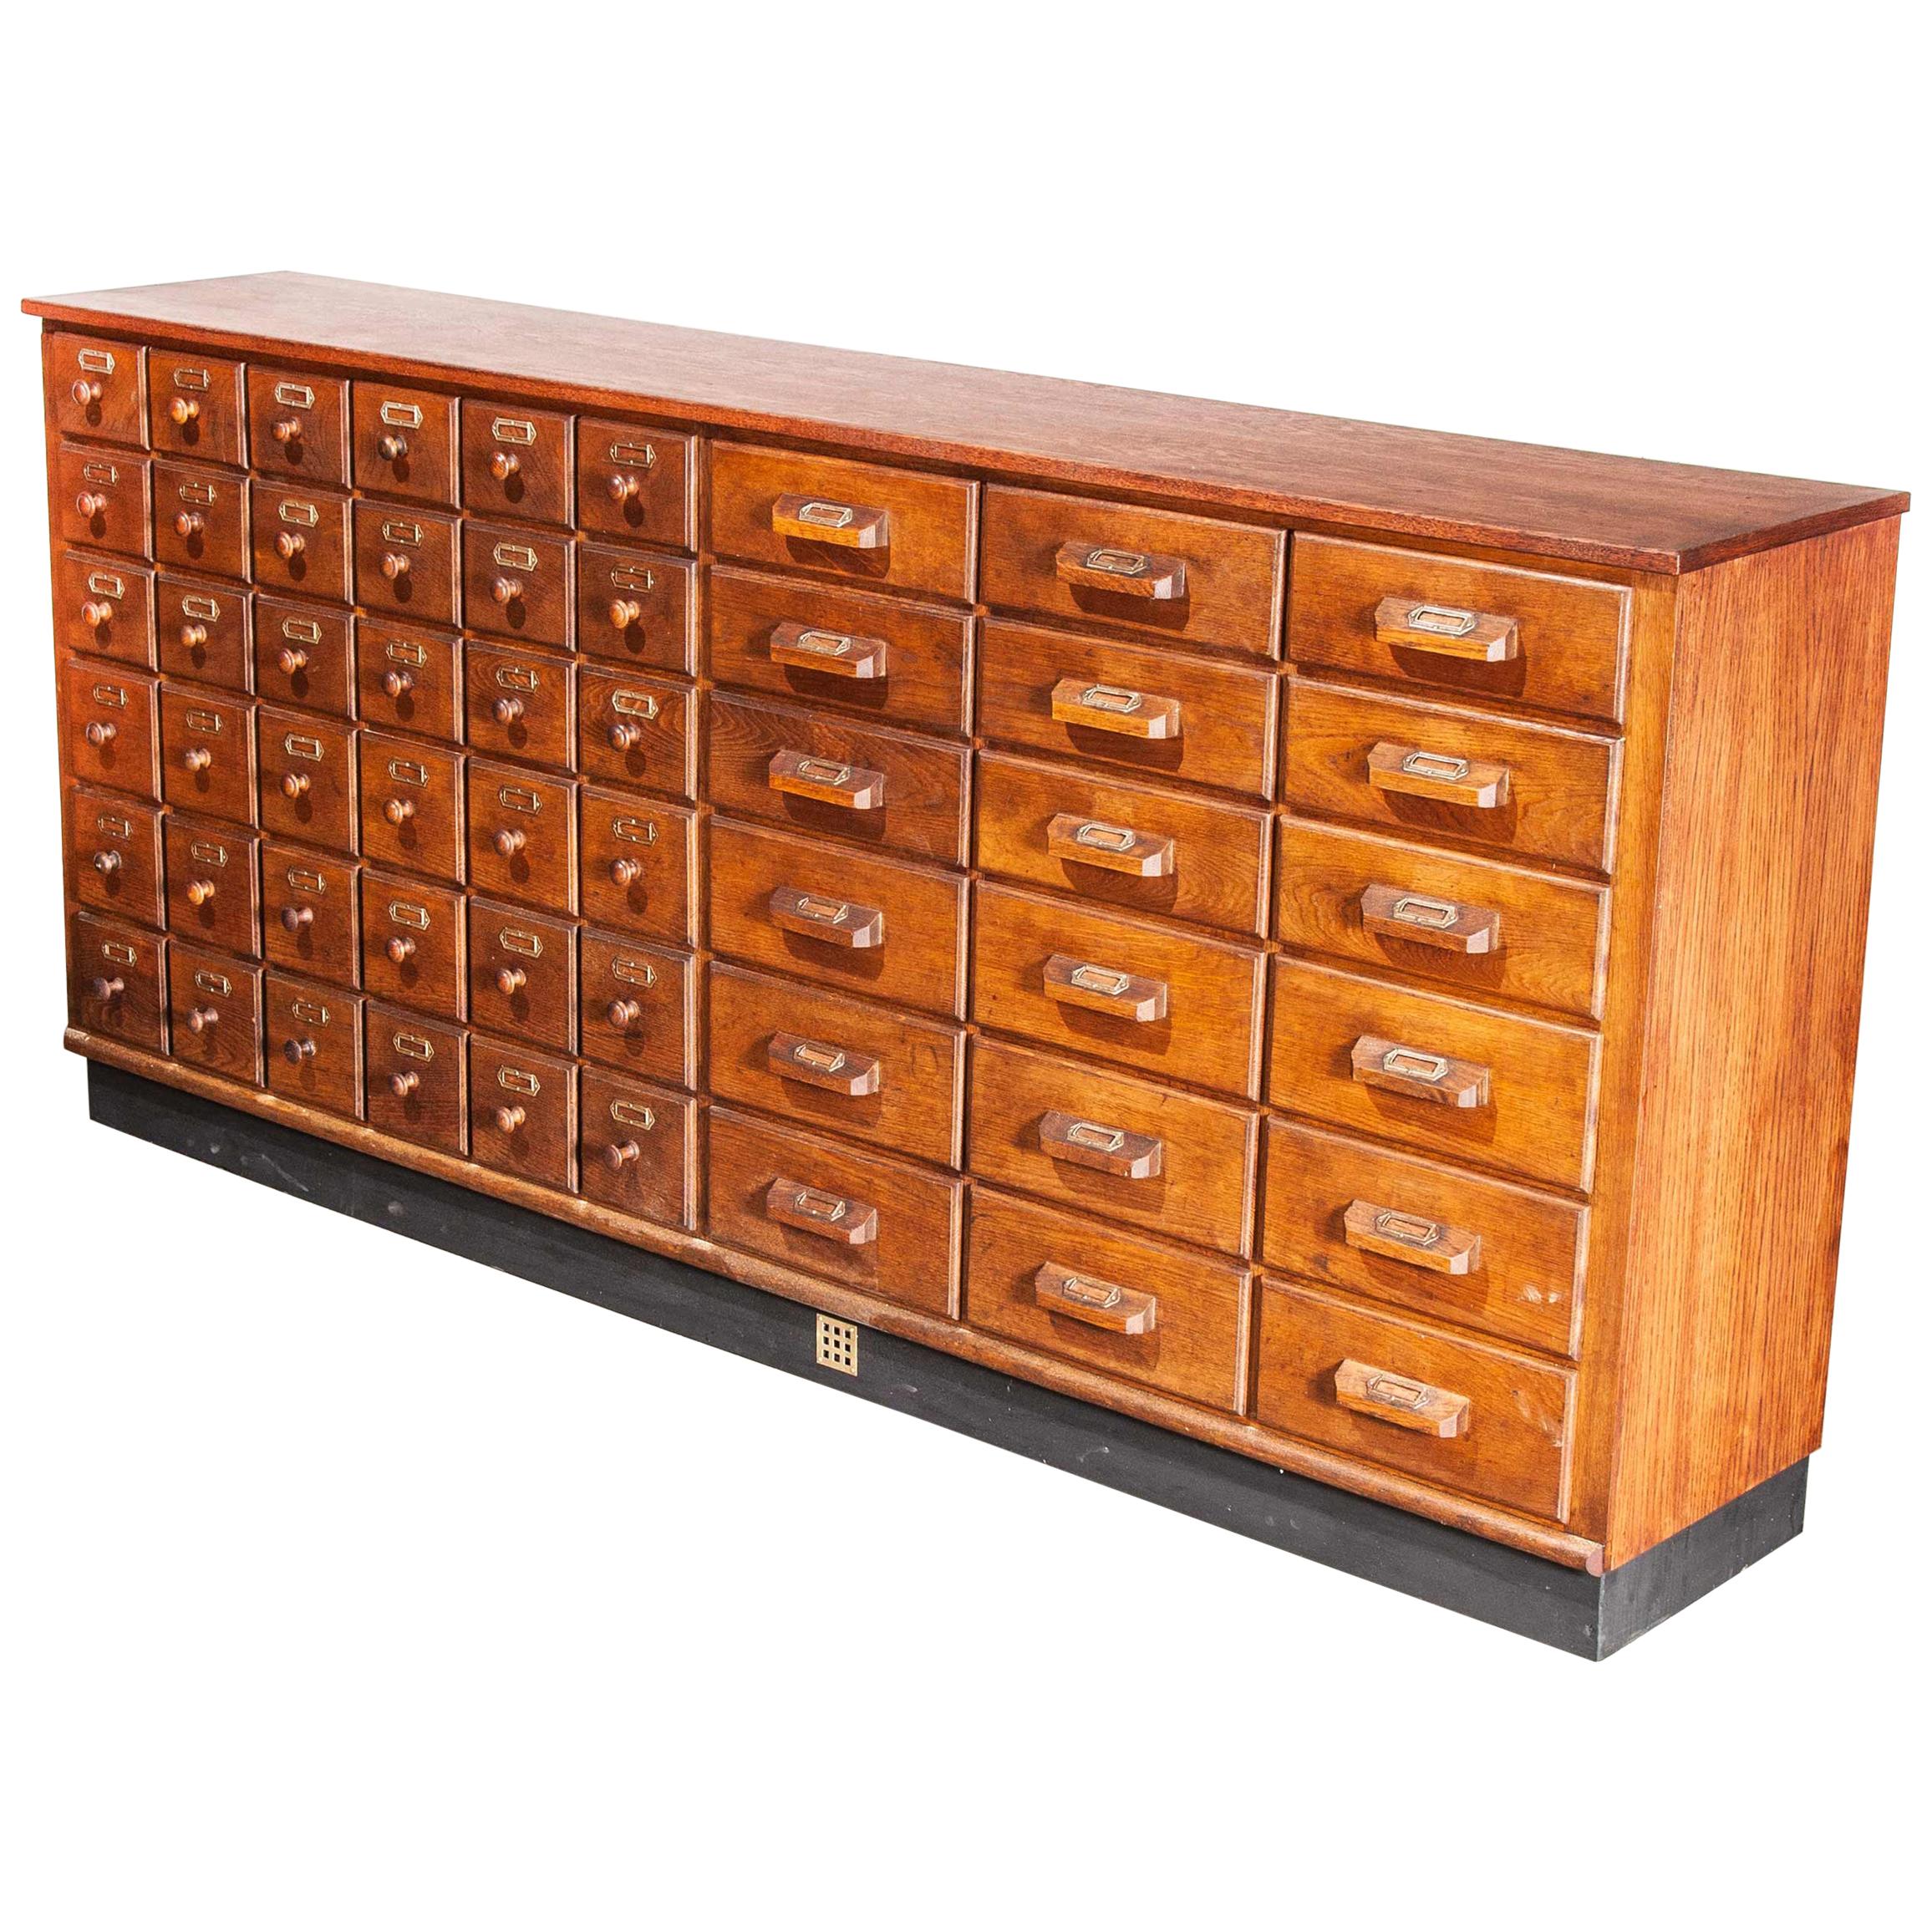 1950s Oak Apothecary Multi Drawer Chest Of Drawers, Fifty Four Drawers